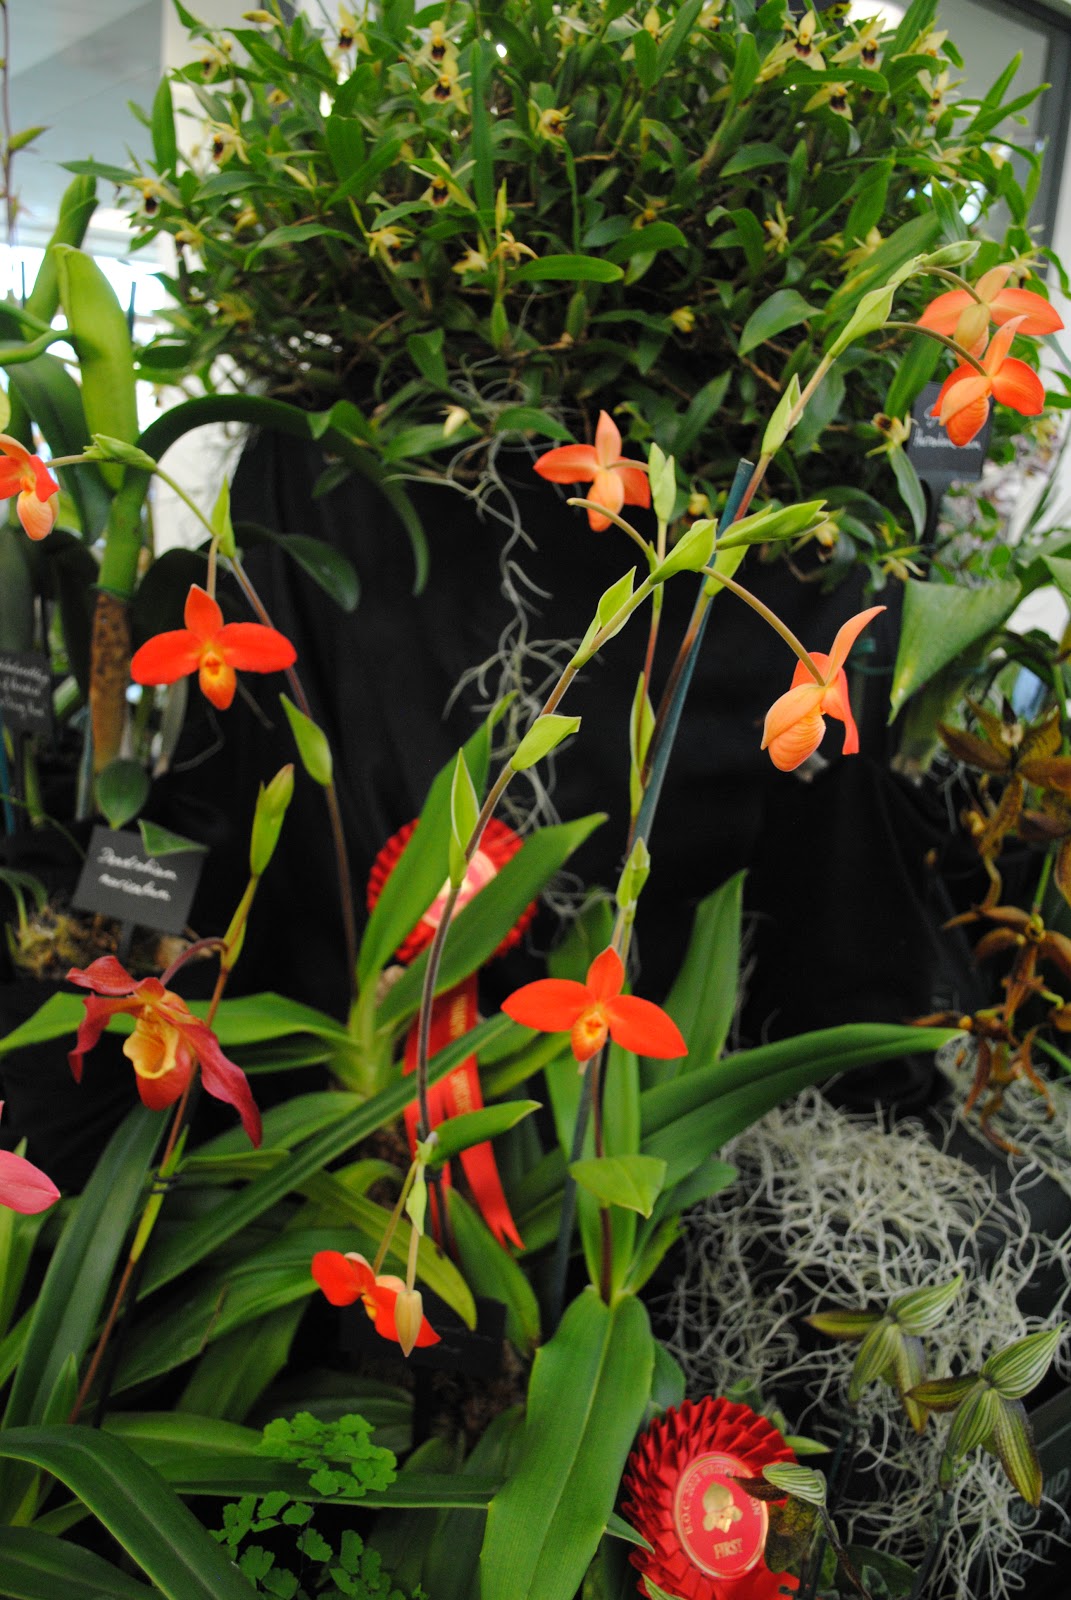 NEWS | The Orchid Society of Great Britain